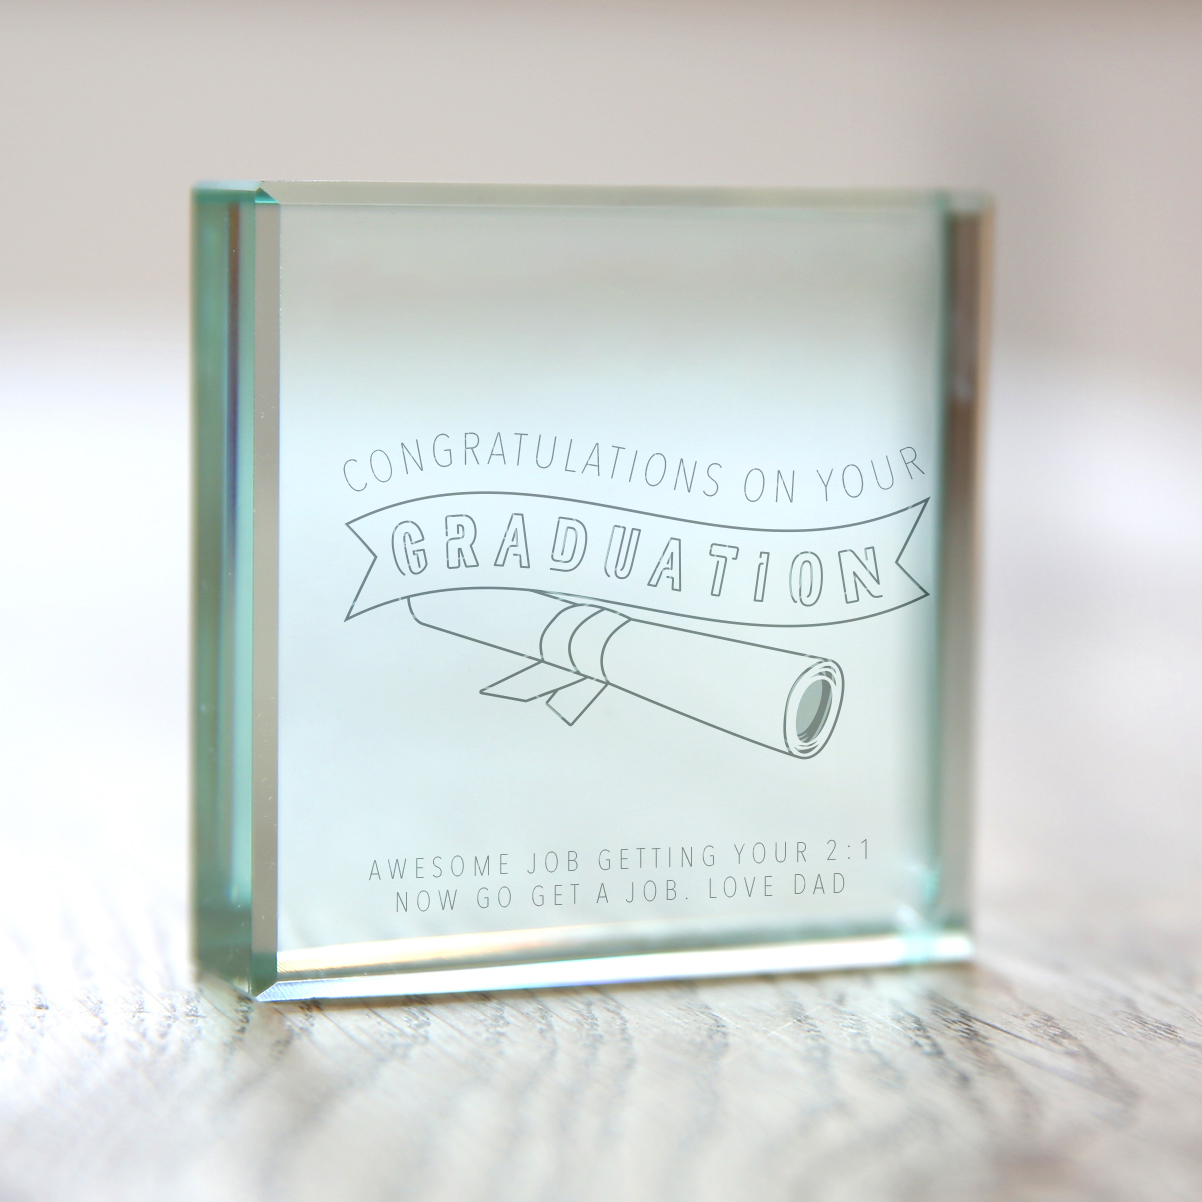 Personalised Engraved Glass Token - Congratulations On Your Graduation